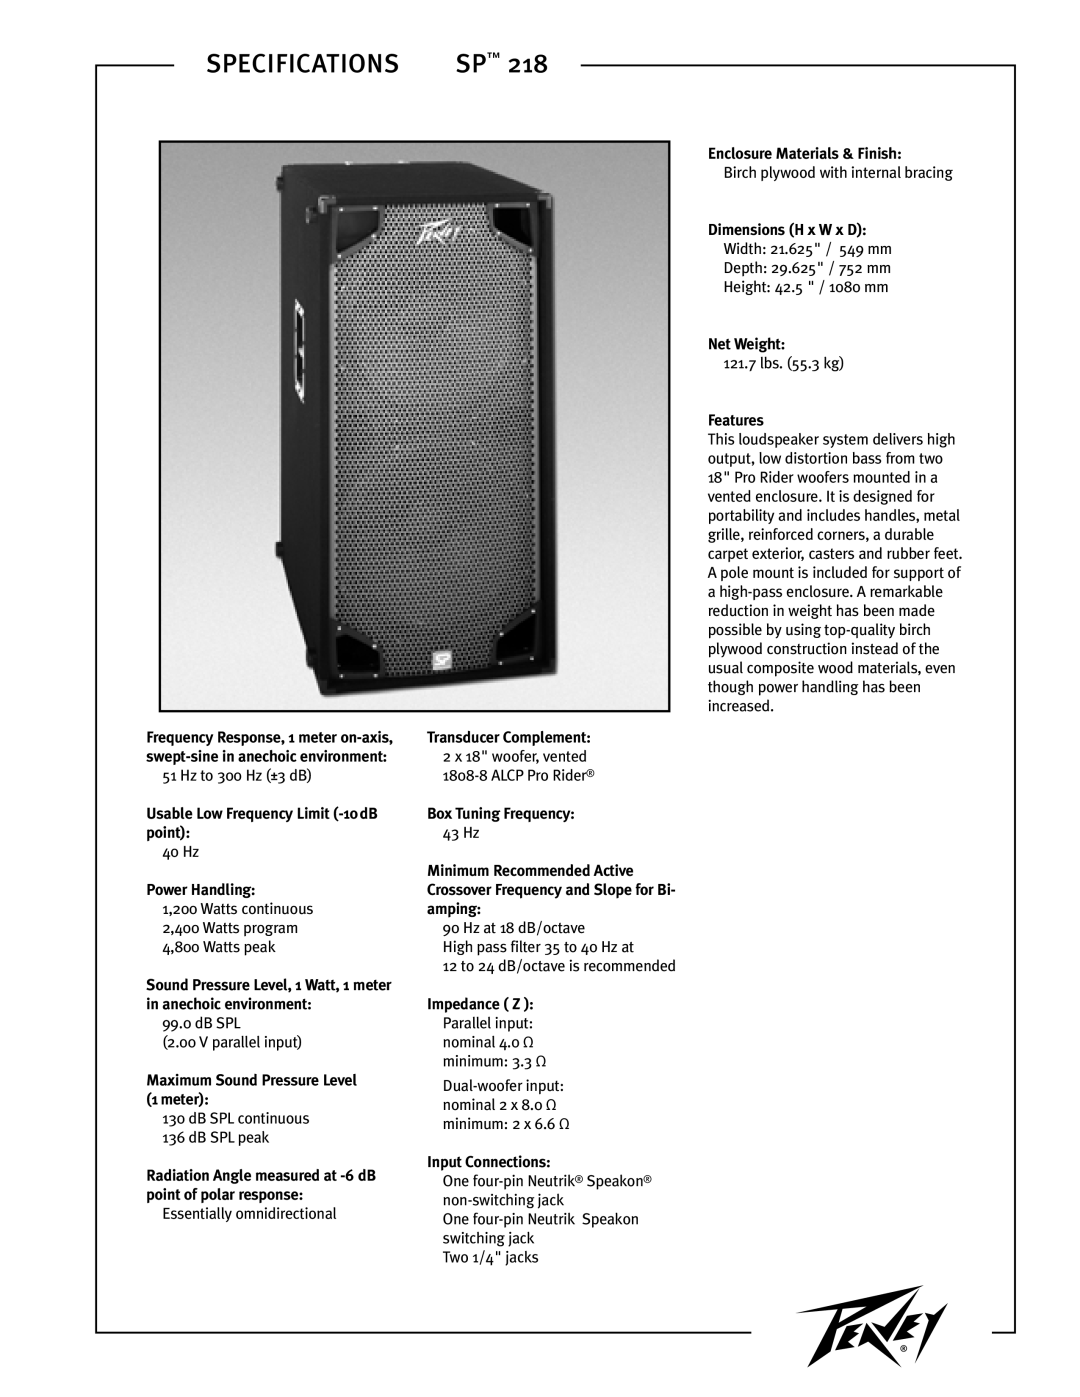 Peavey SP 218 dimensions Specifications 